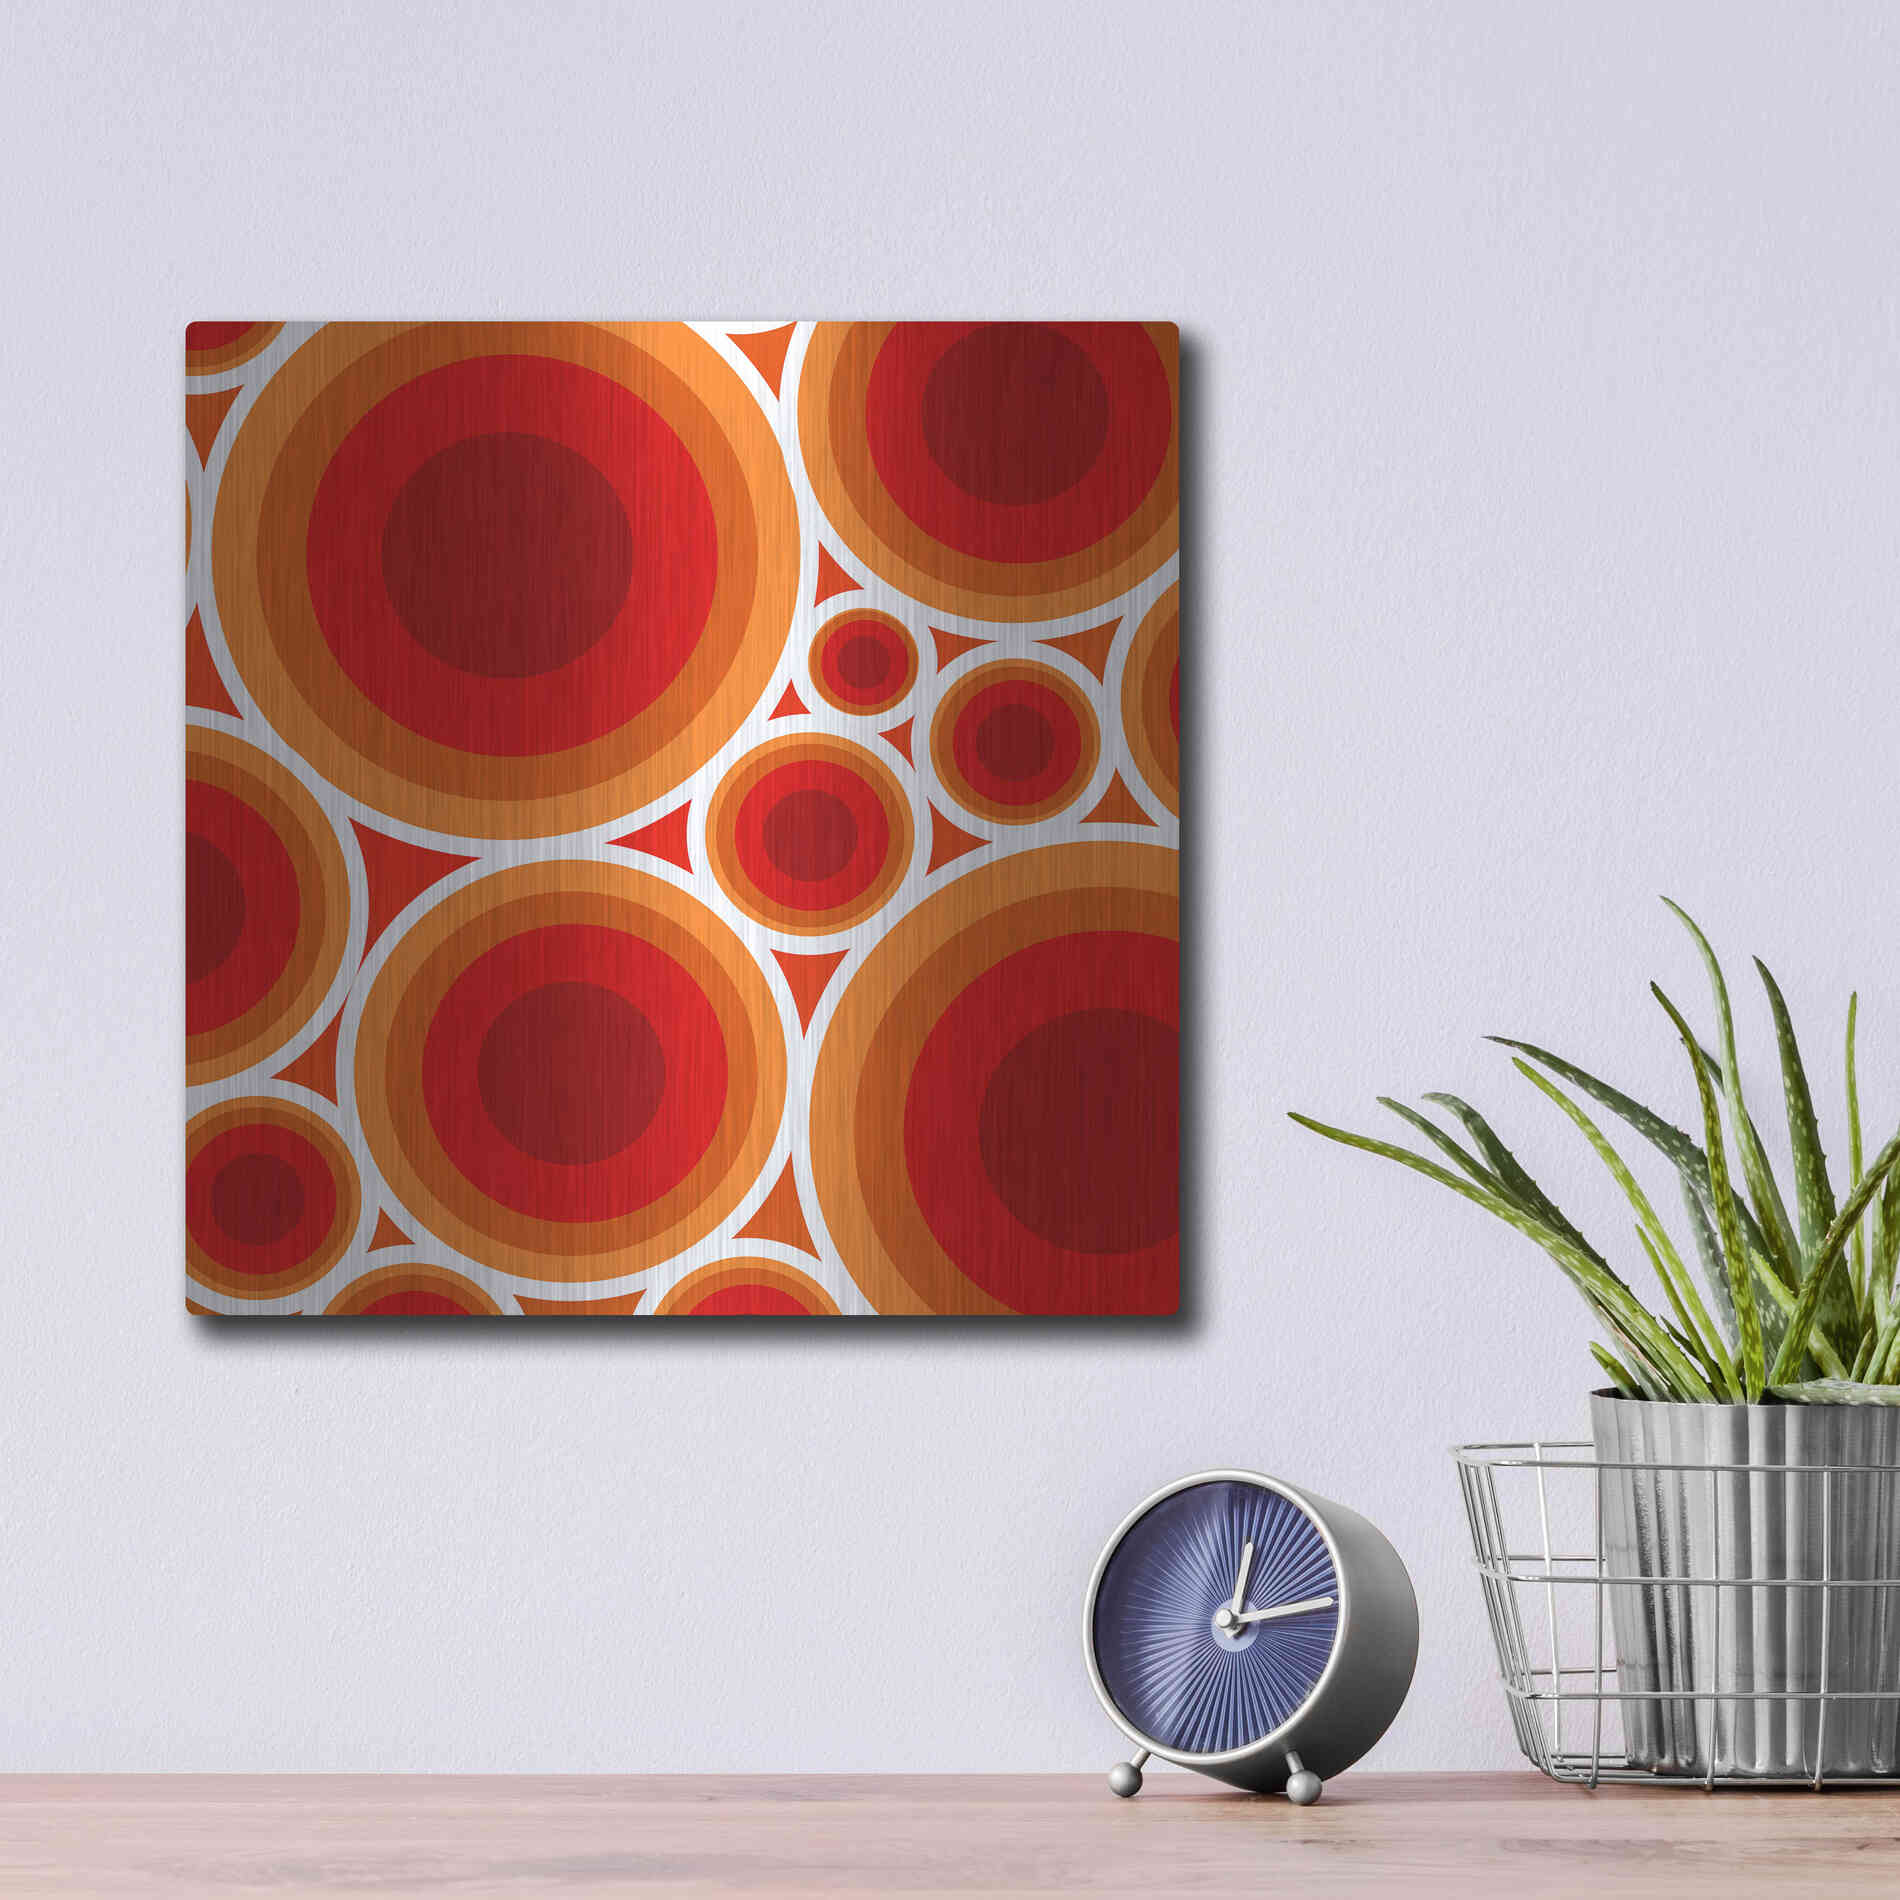 Luxe Metal Art 'Circles 1' by GraphINC, Metal Wall Art,12x12